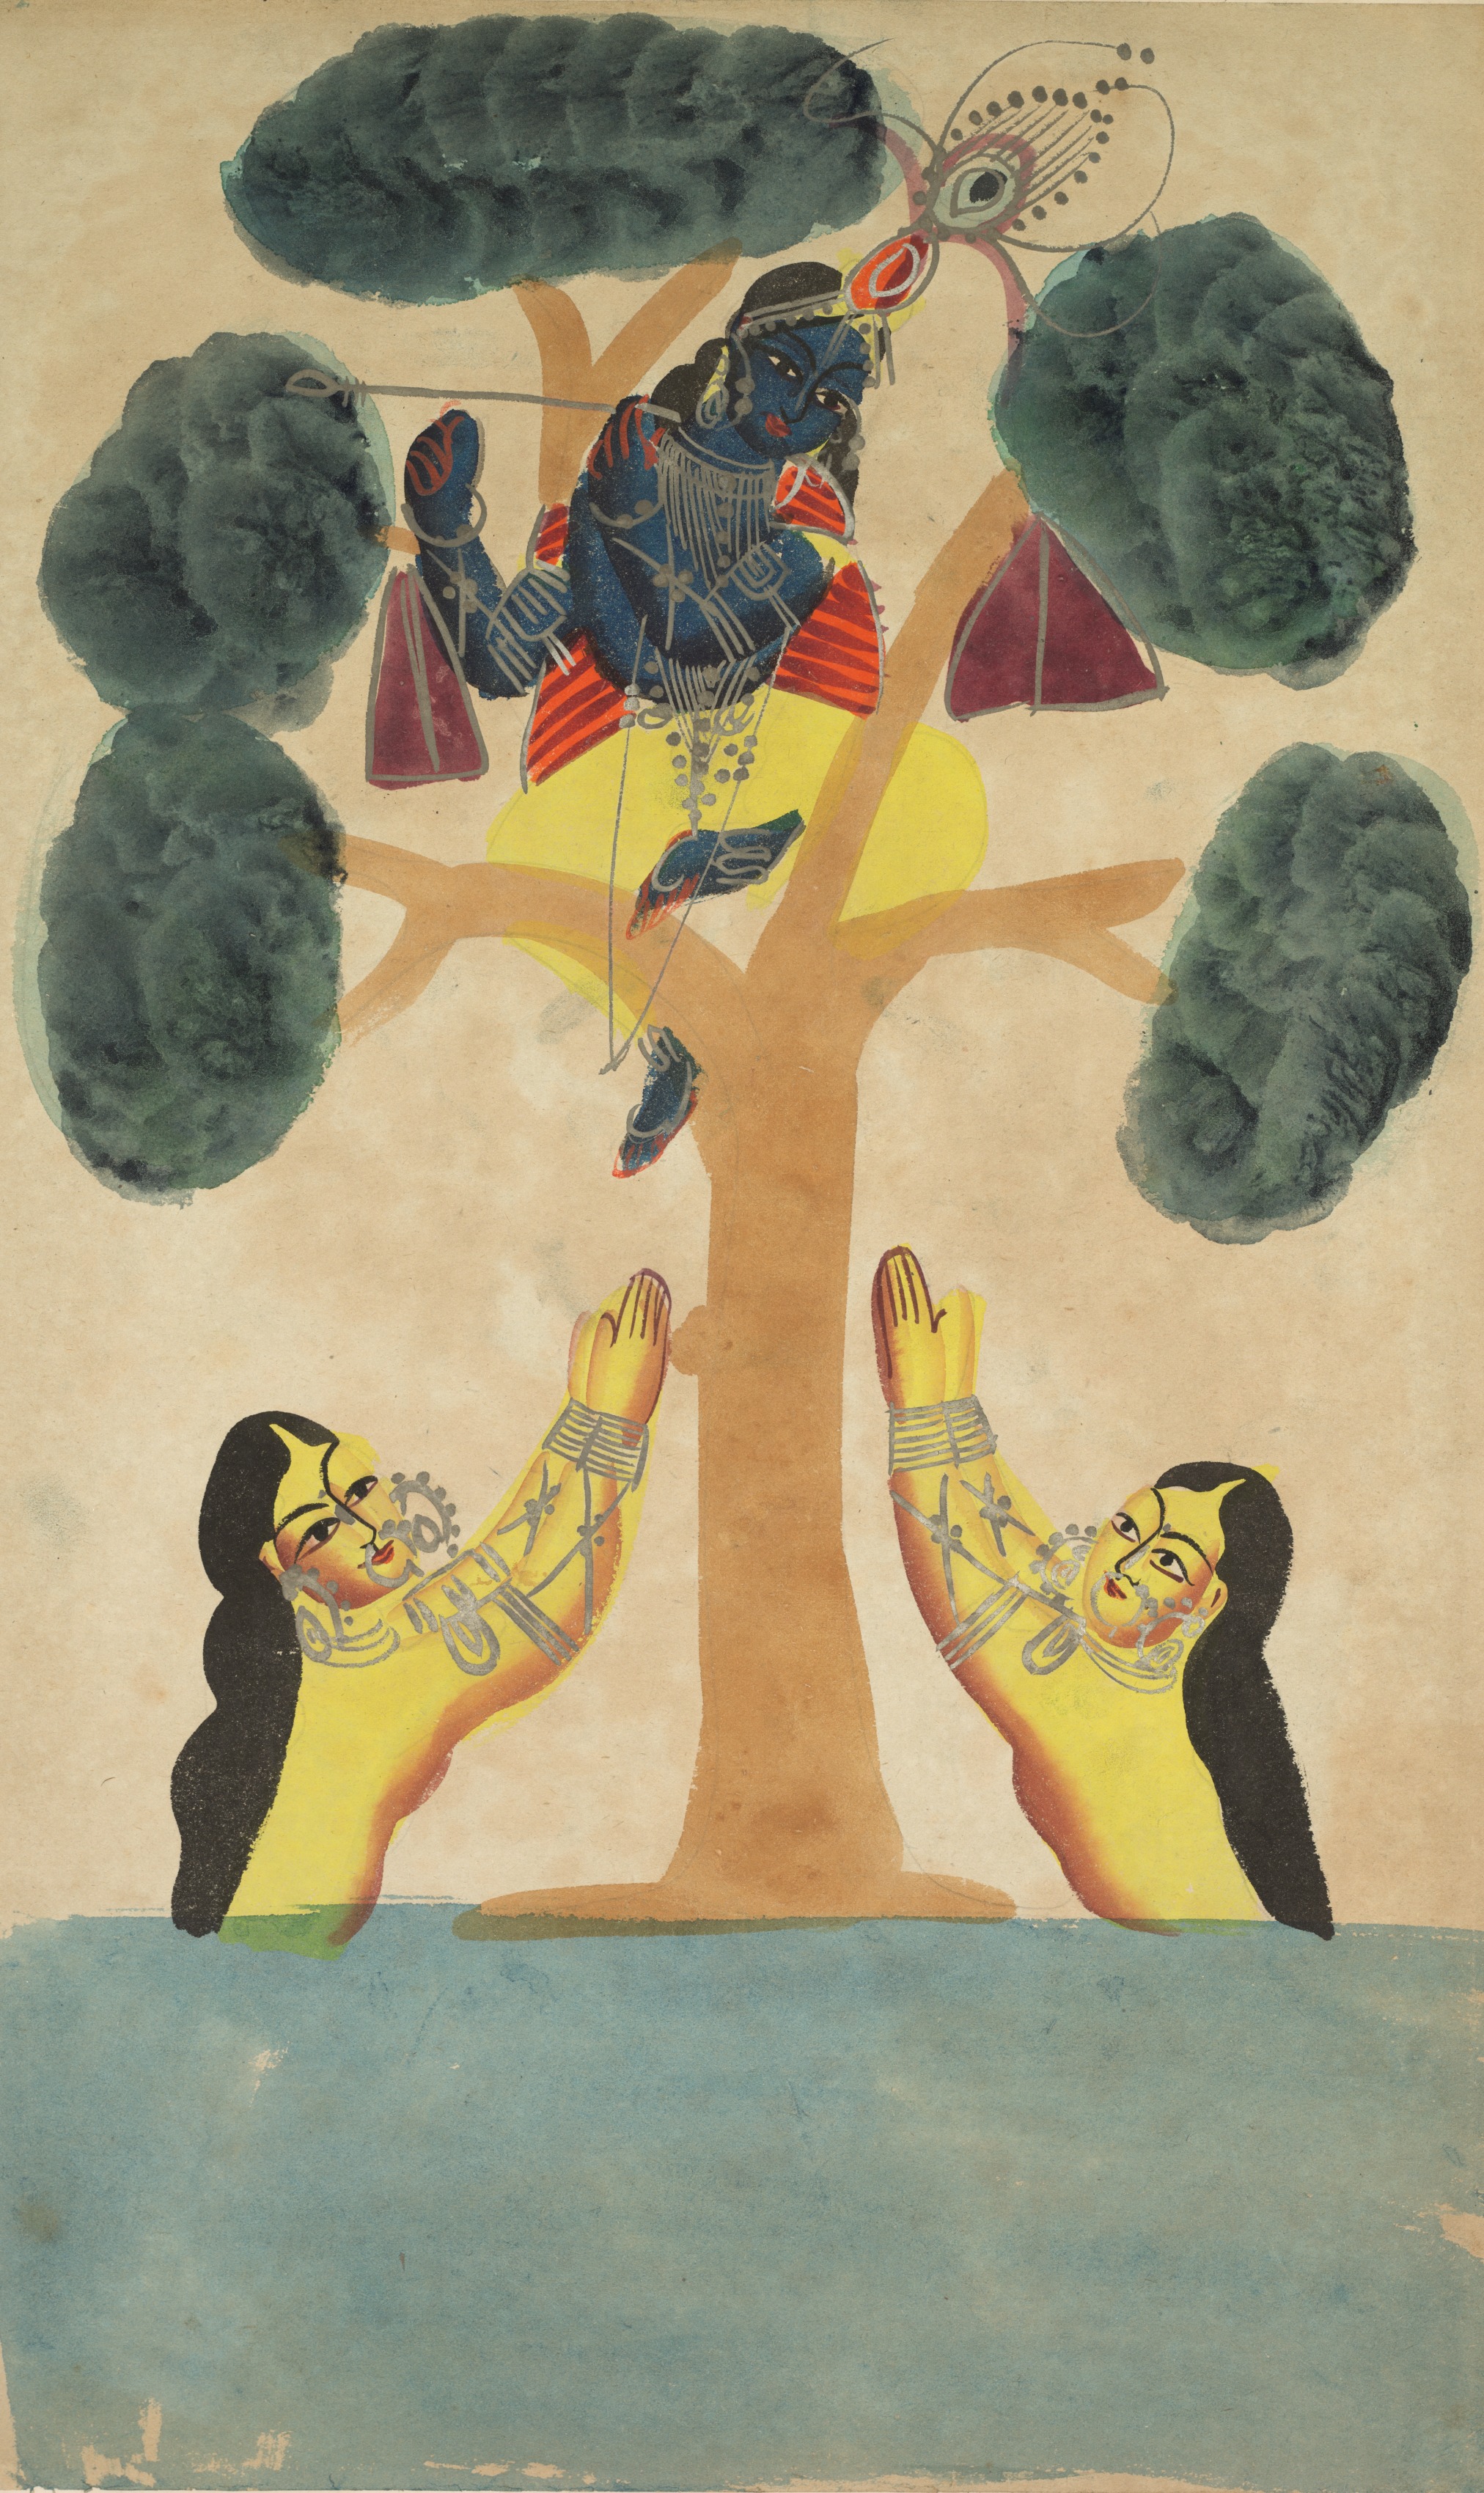 Krishna Steals the Clothes of the Cowgirls (Gopis) (recto), from a Kalighat album